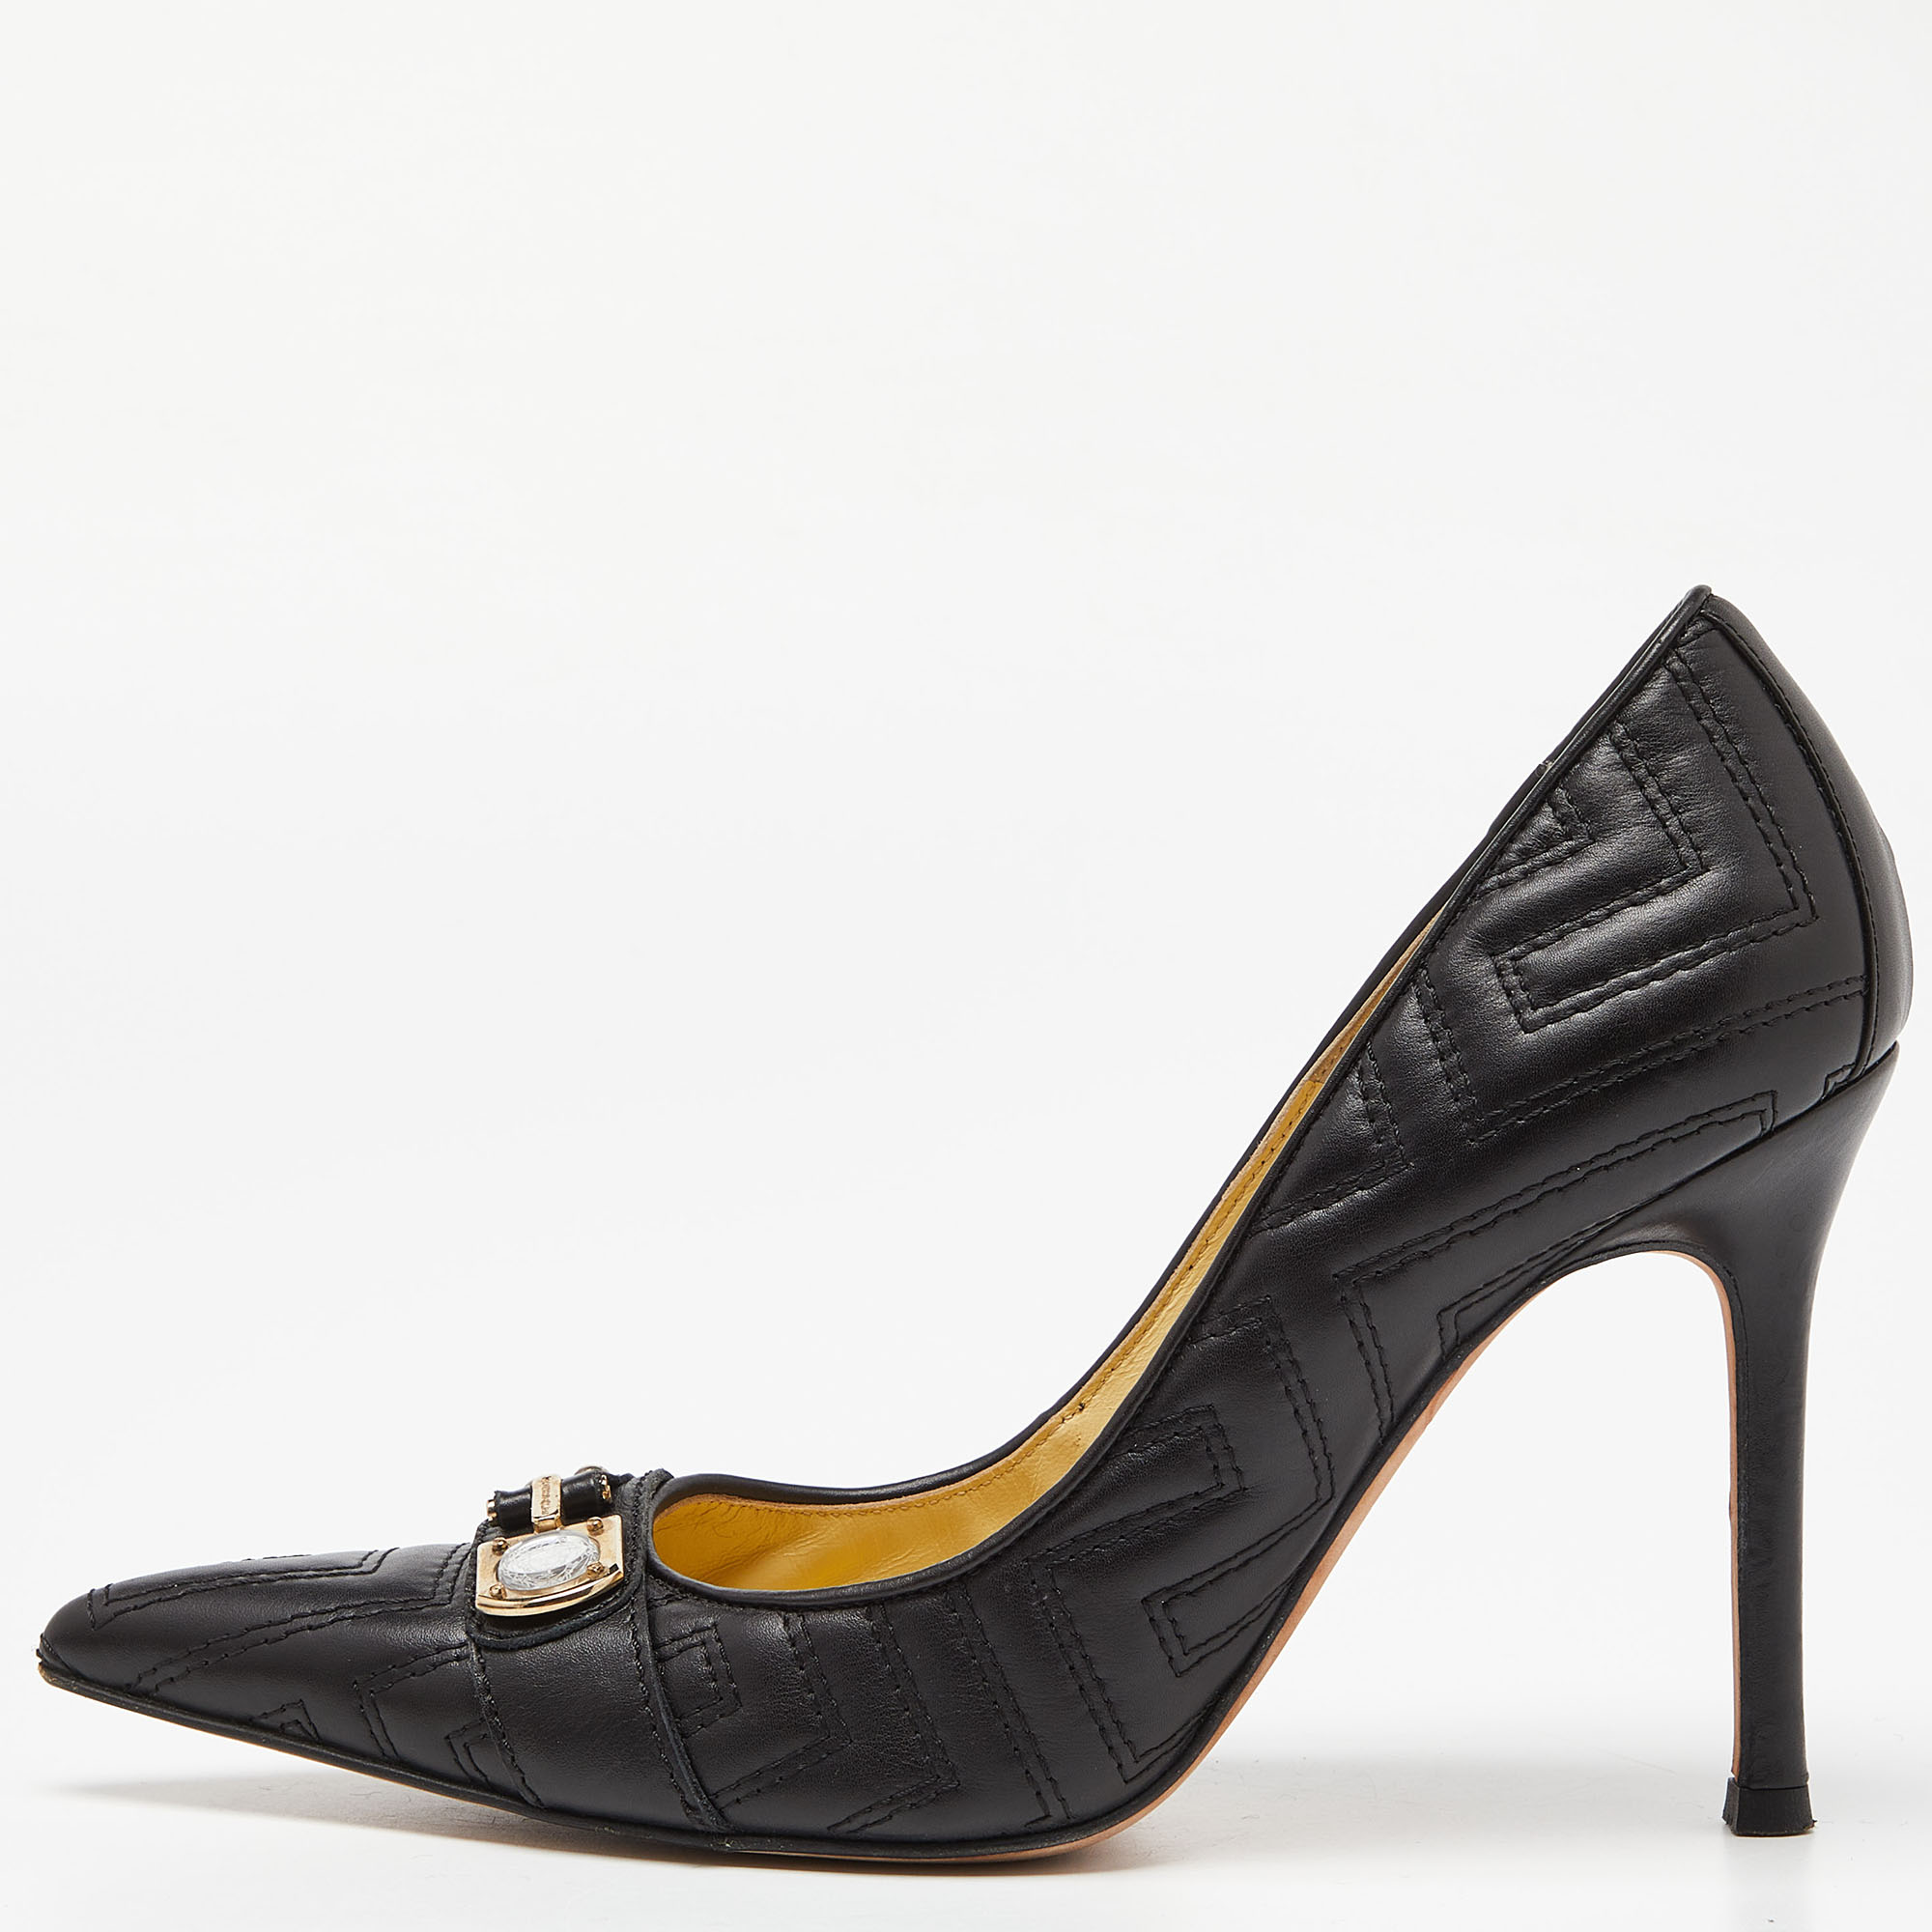 Versace Black Leather Quilted Pointed Toe Pumps Size 39